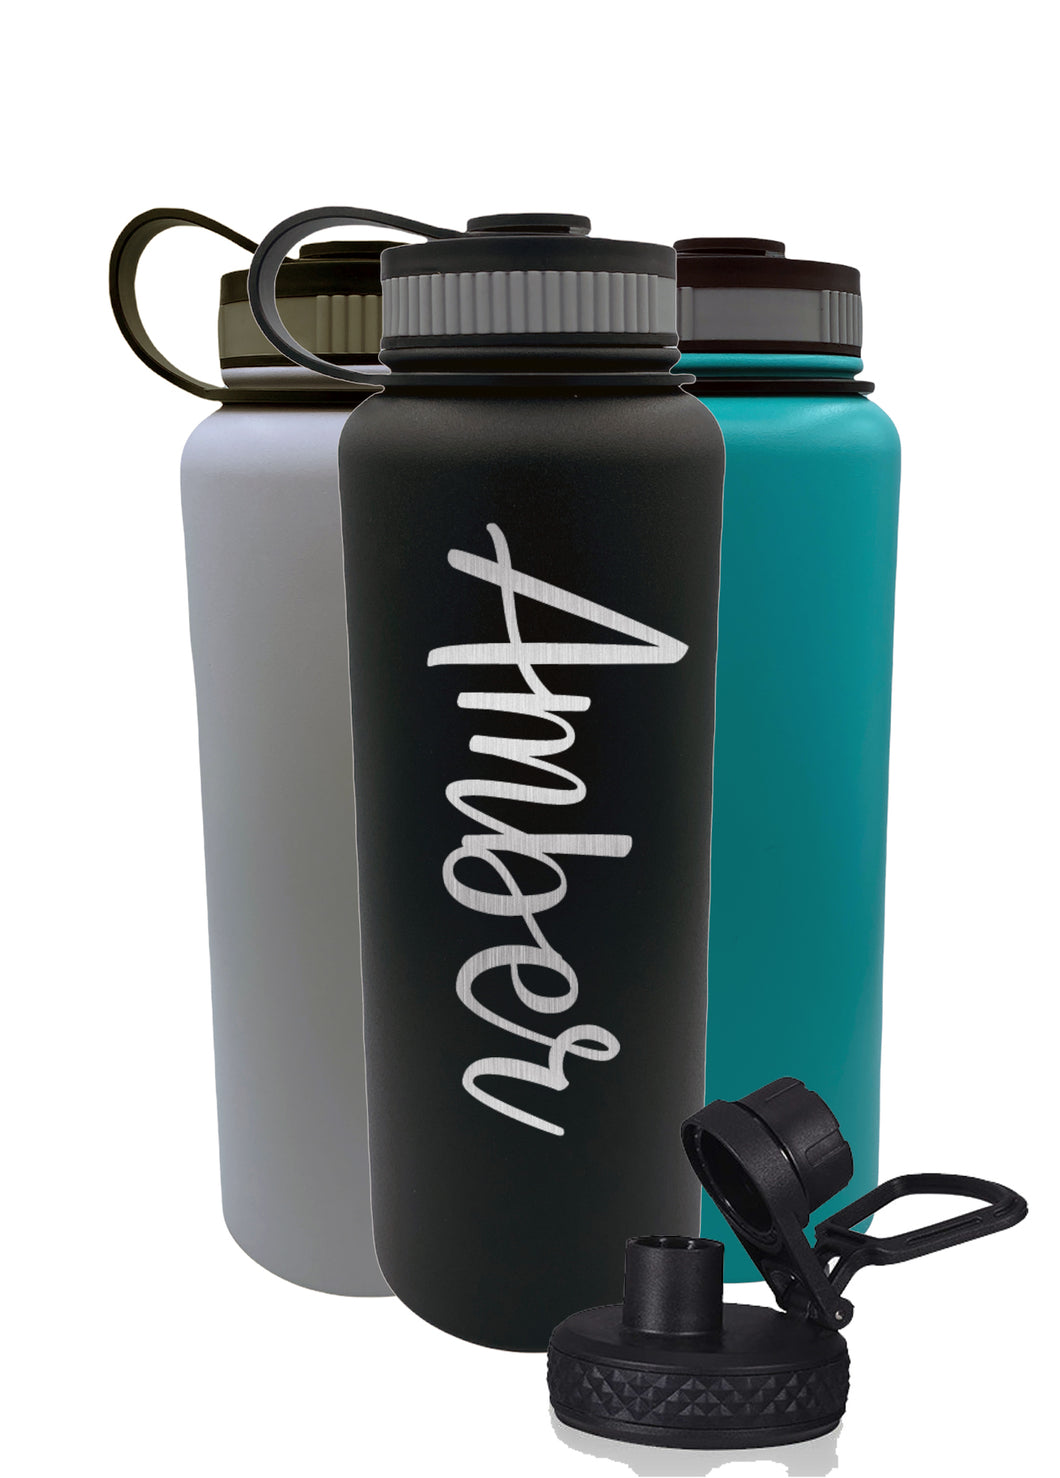 Personalized Insulated Water Bottles. Photo Water Bottles